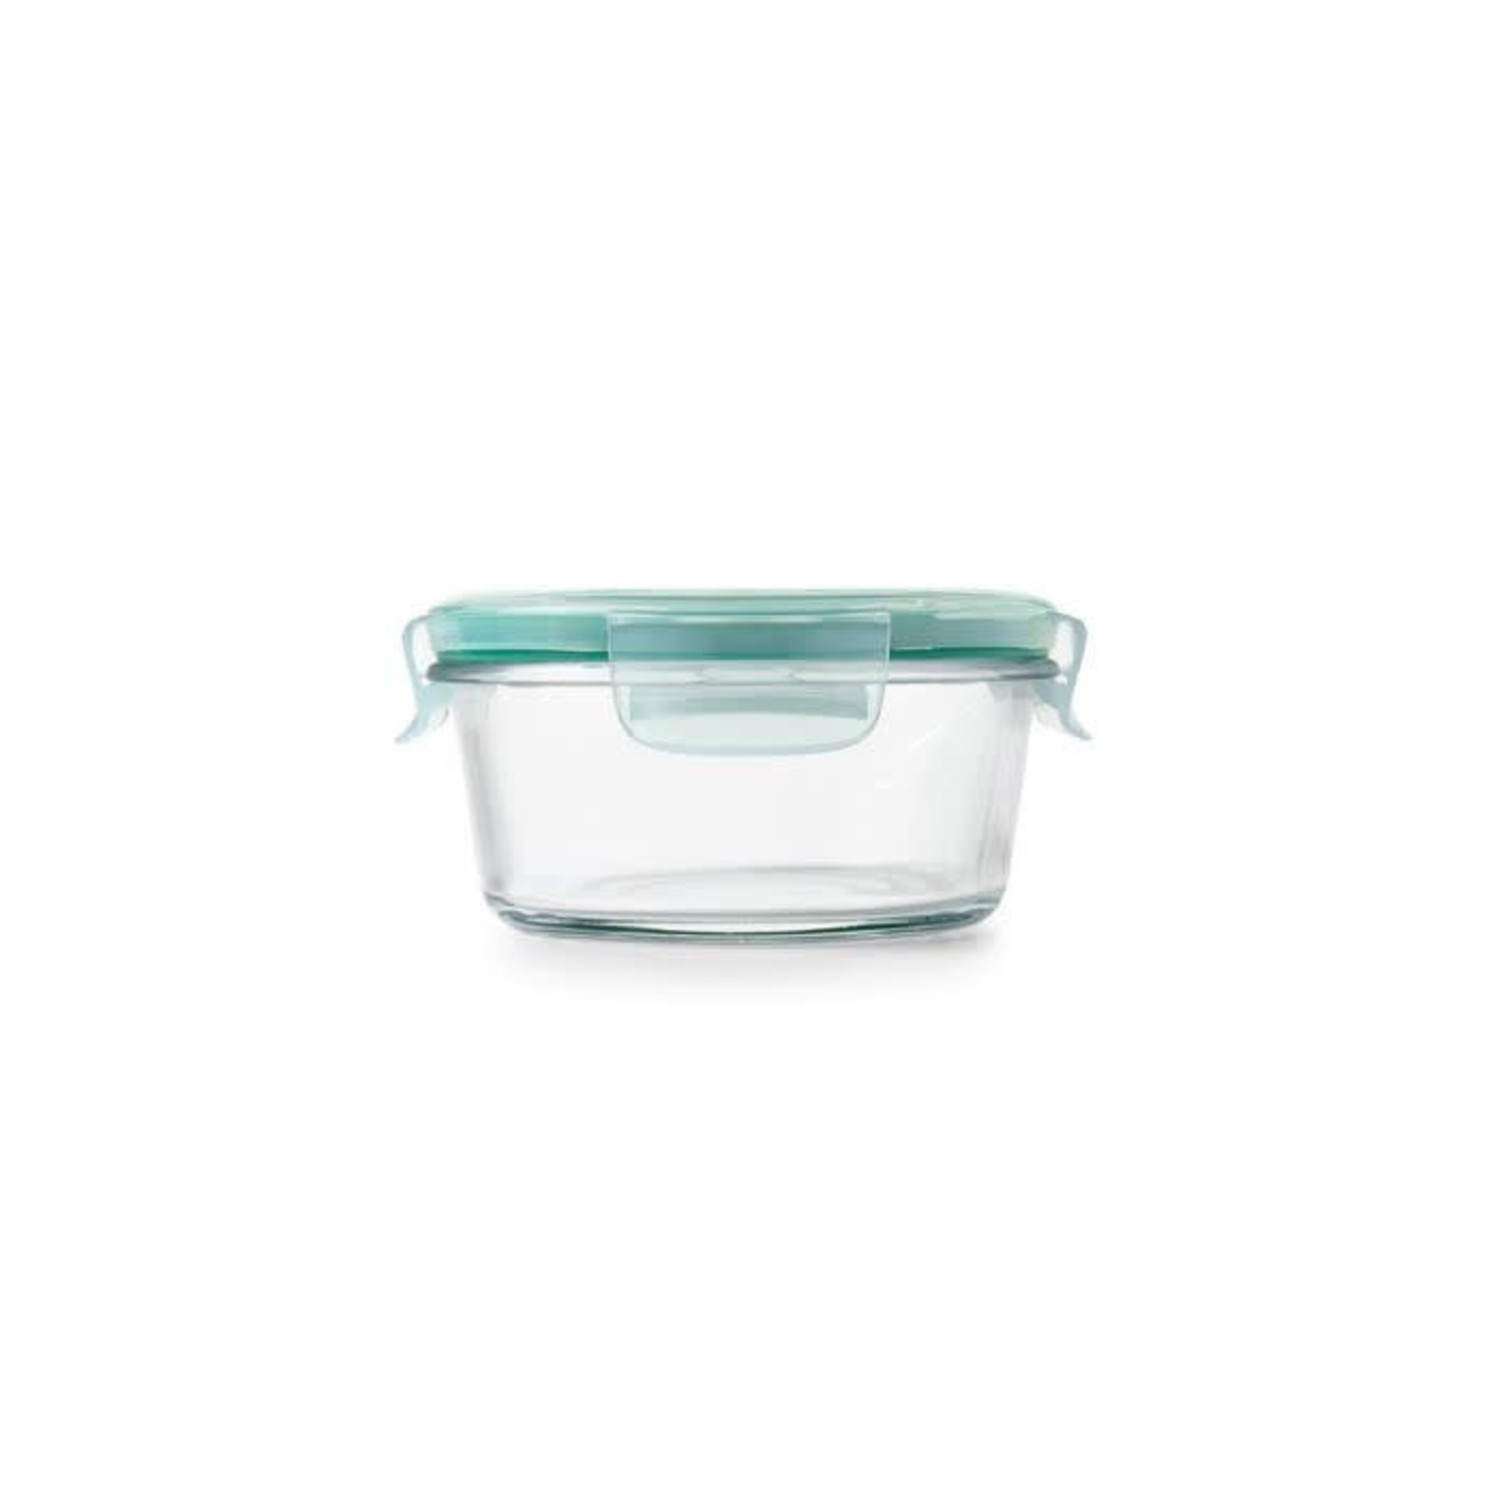 https://cdn.shoplightspeed.com/shops/633447/files/33759244/1500x4000x3/oxo-oxo-7-cup-round-glass-storage-container.jpg